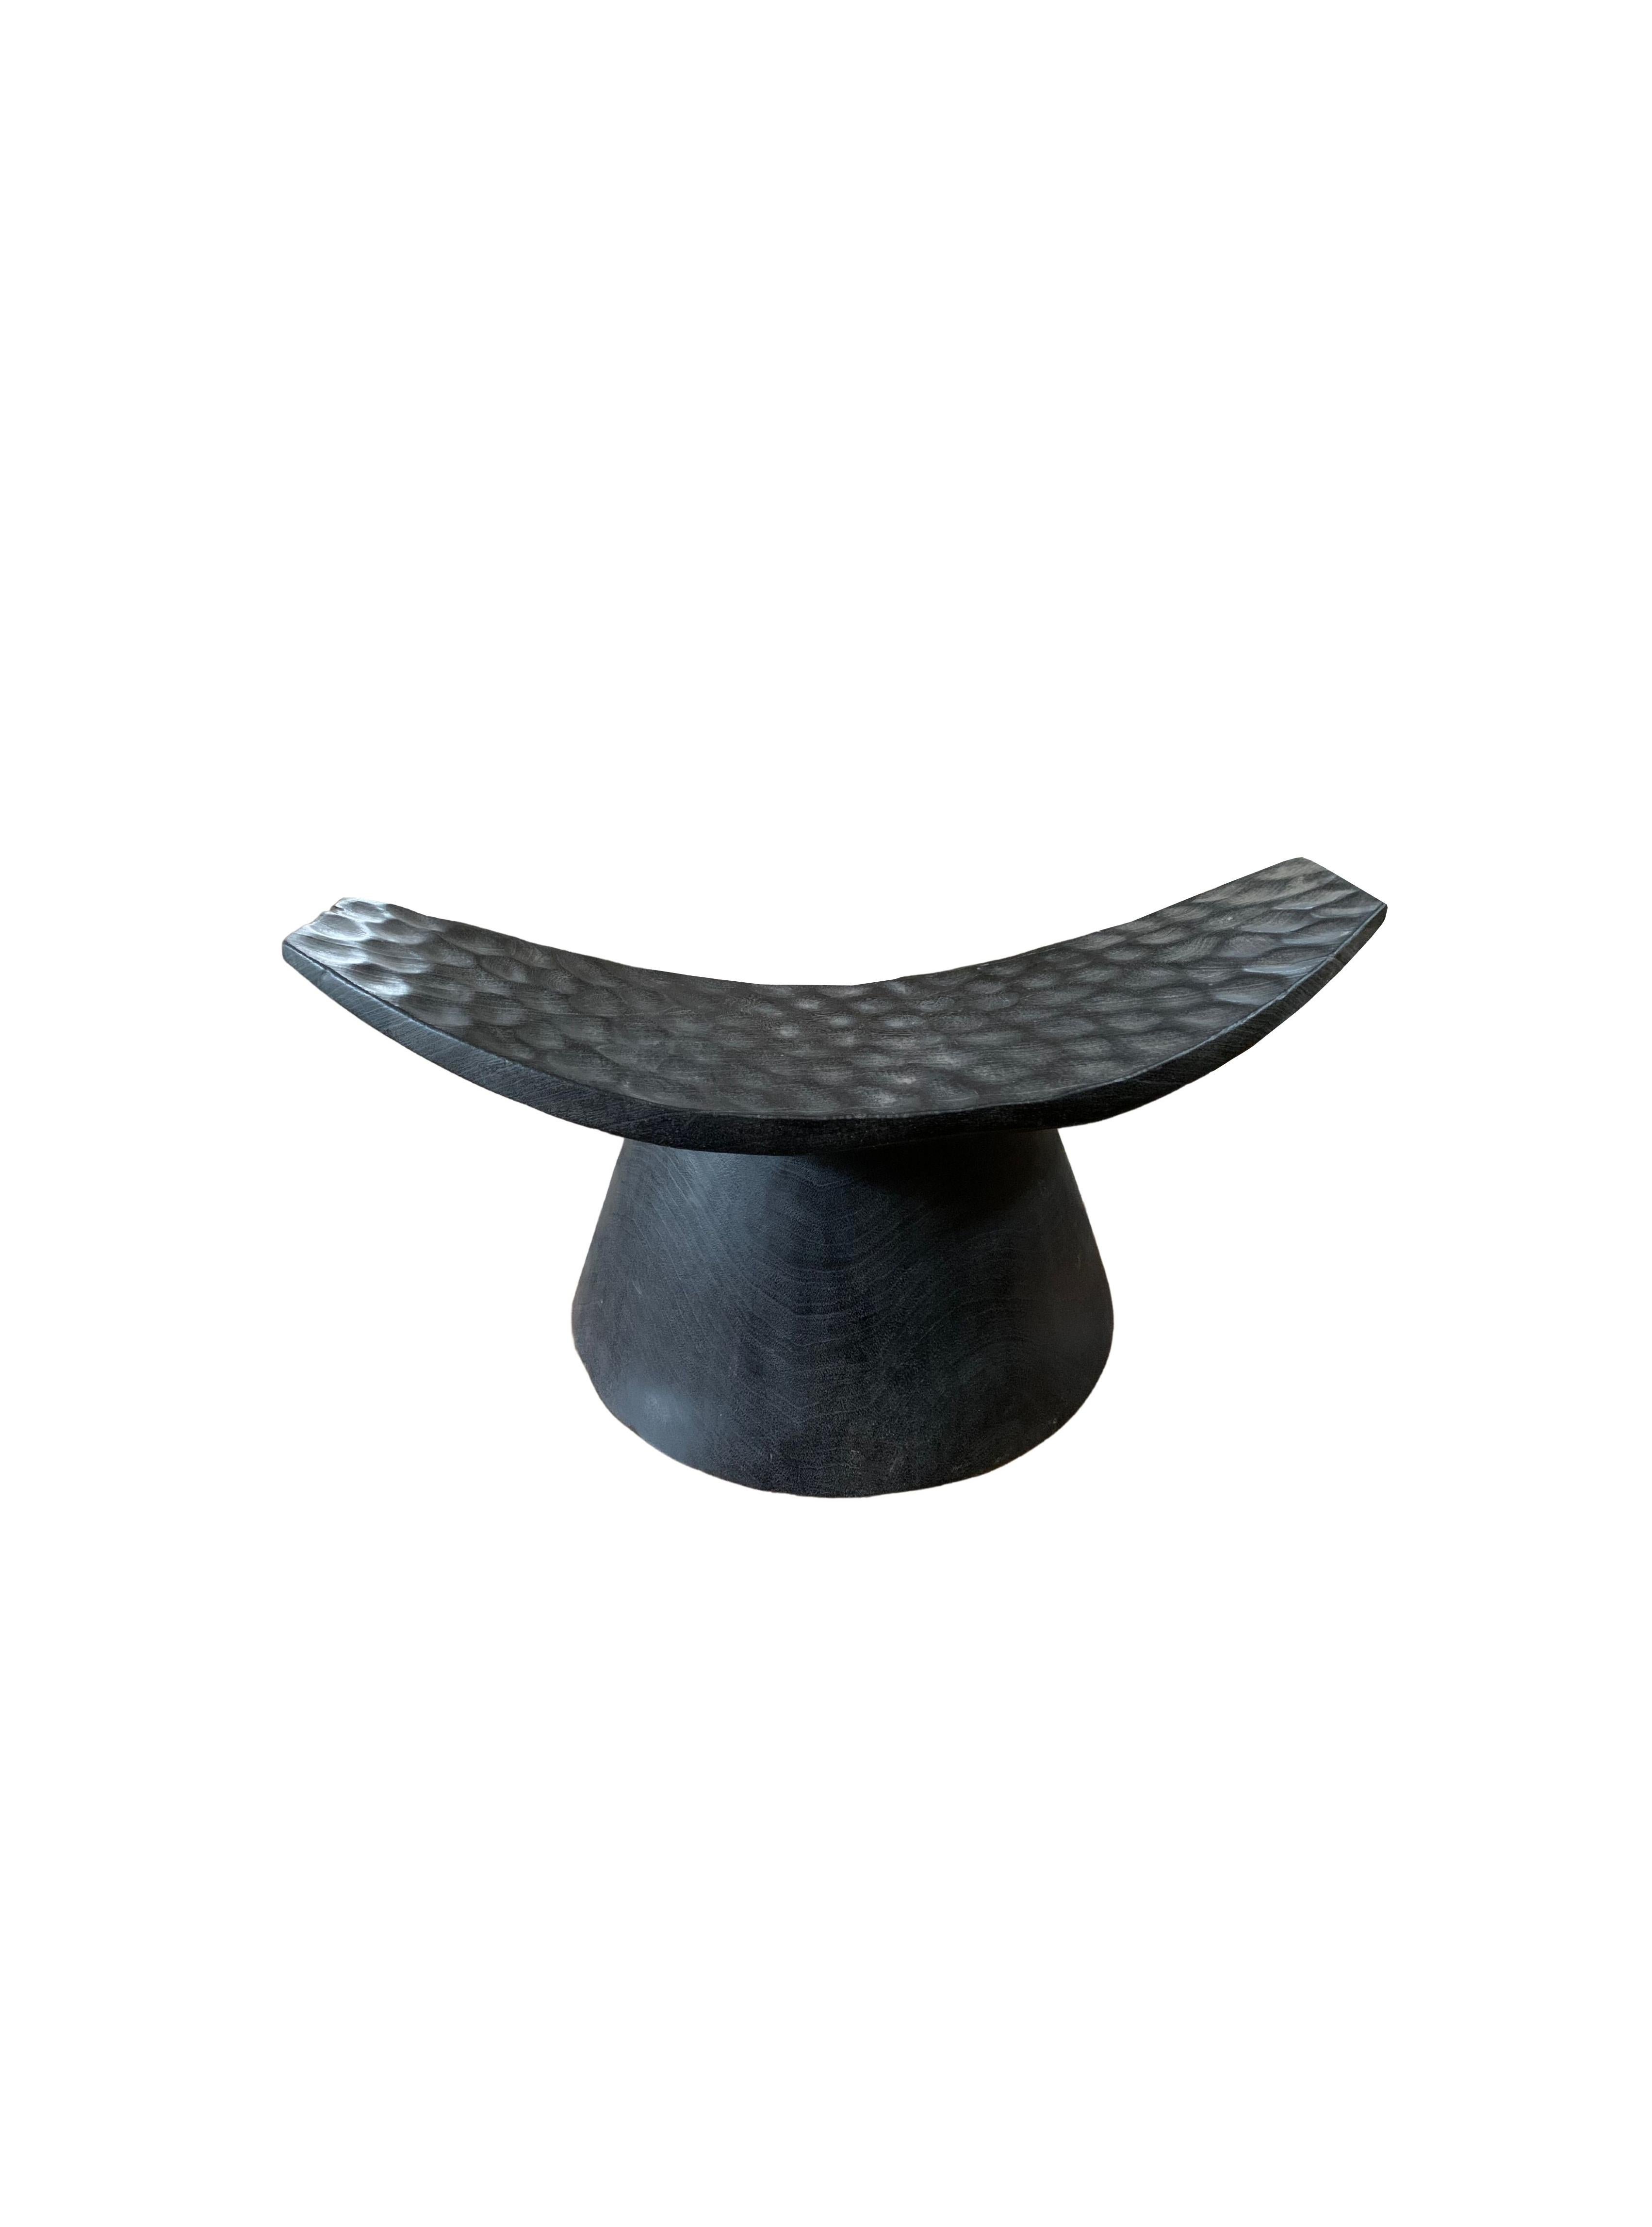 curved stool seat